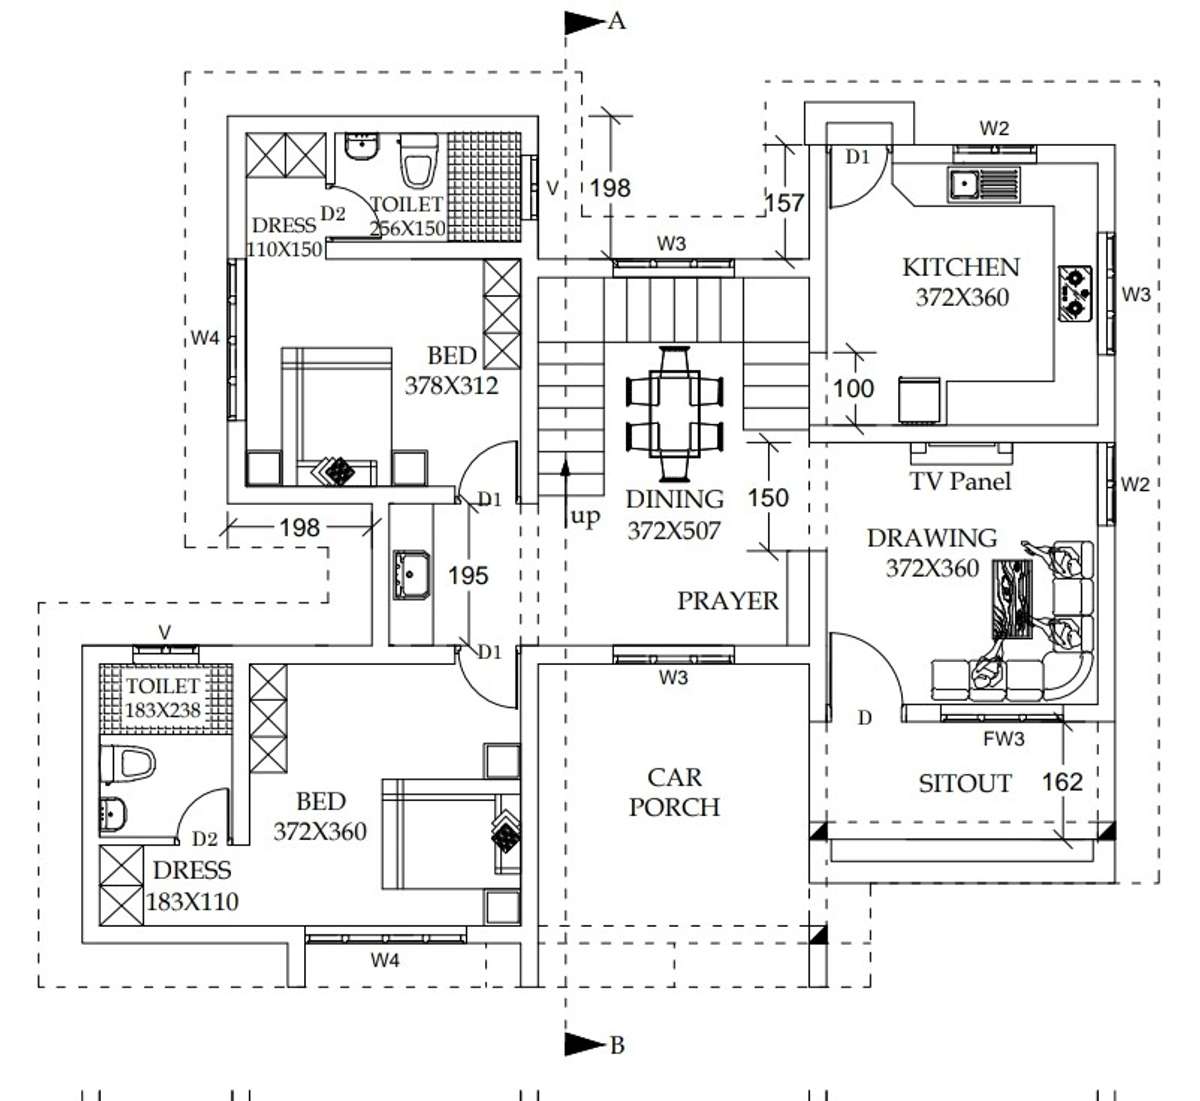 GF Plan
On Going Project
 #HouseDesigns
 #Contractor
 #HouseConstruction